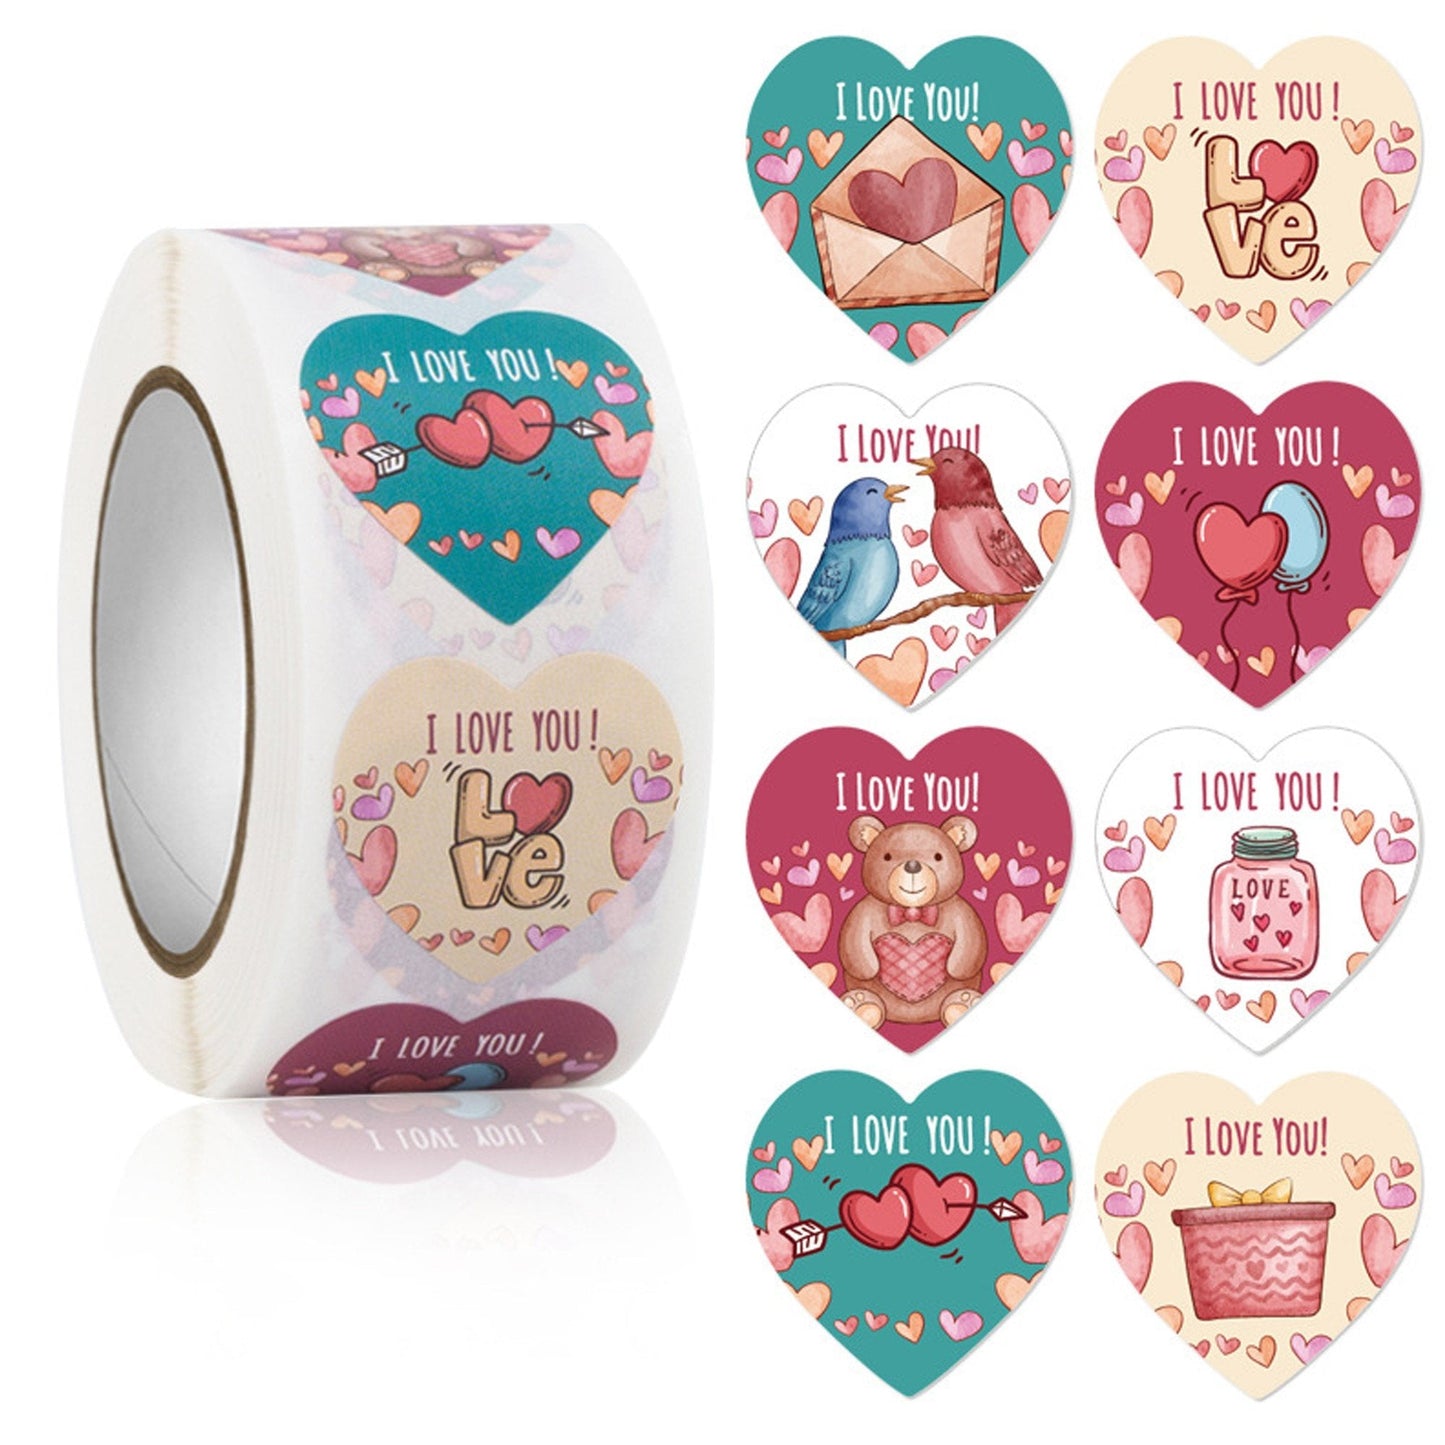 1 Roll 500pcs Valentine's Day Heart with I Love You Paper Sticker Labels 25mm